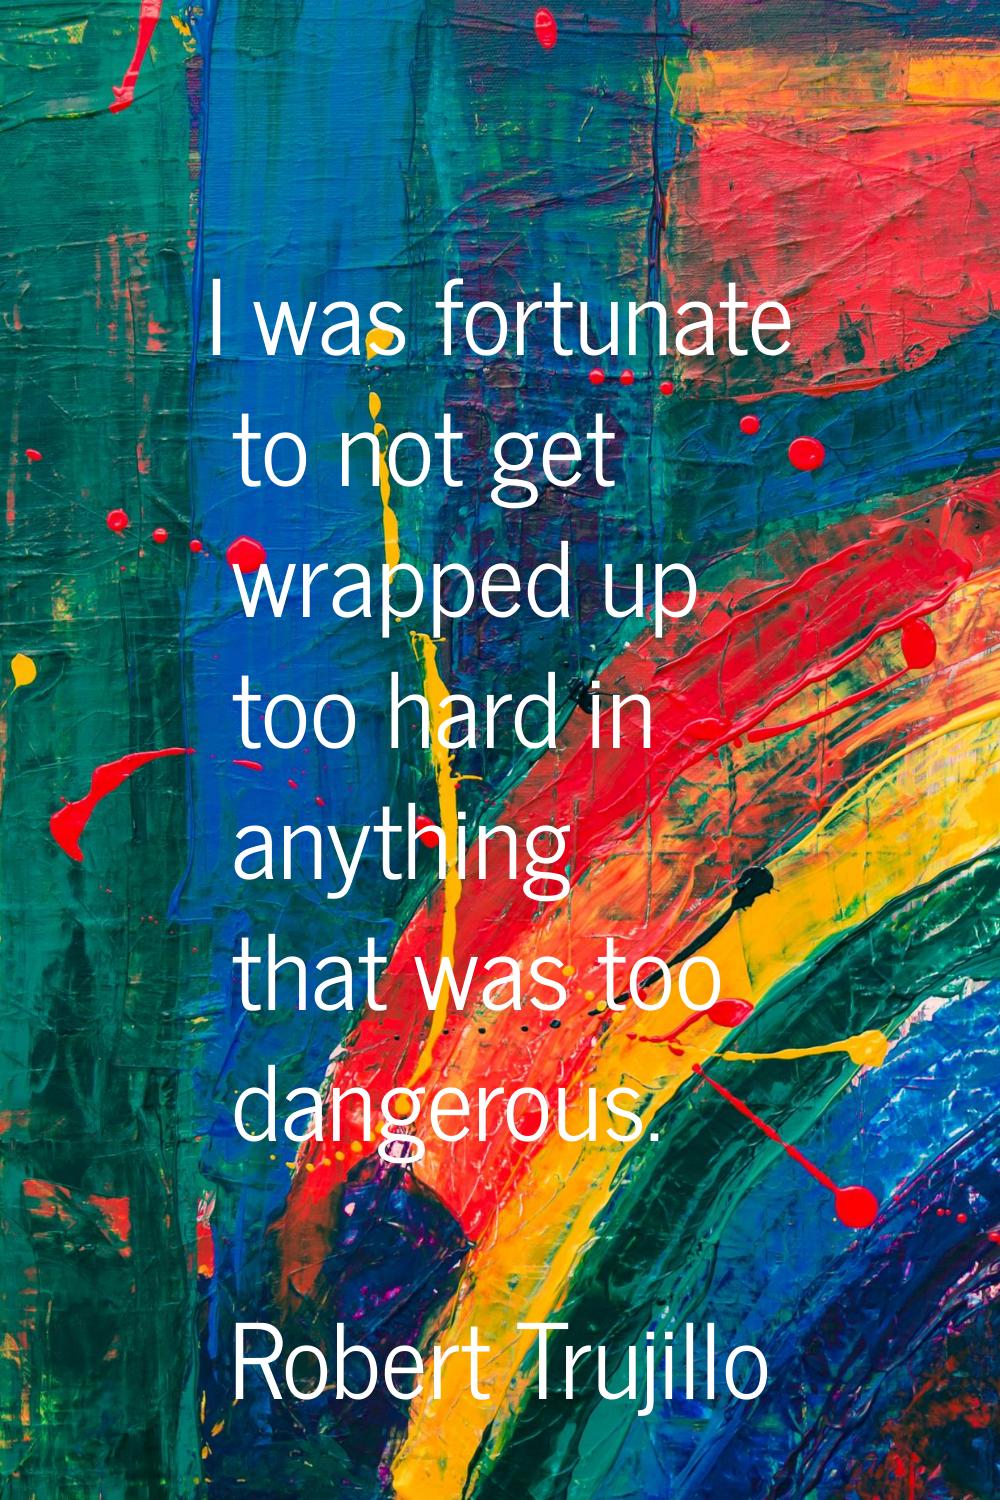 I was fortunate to not get wrapped up too hard in anything that was too dangerous.